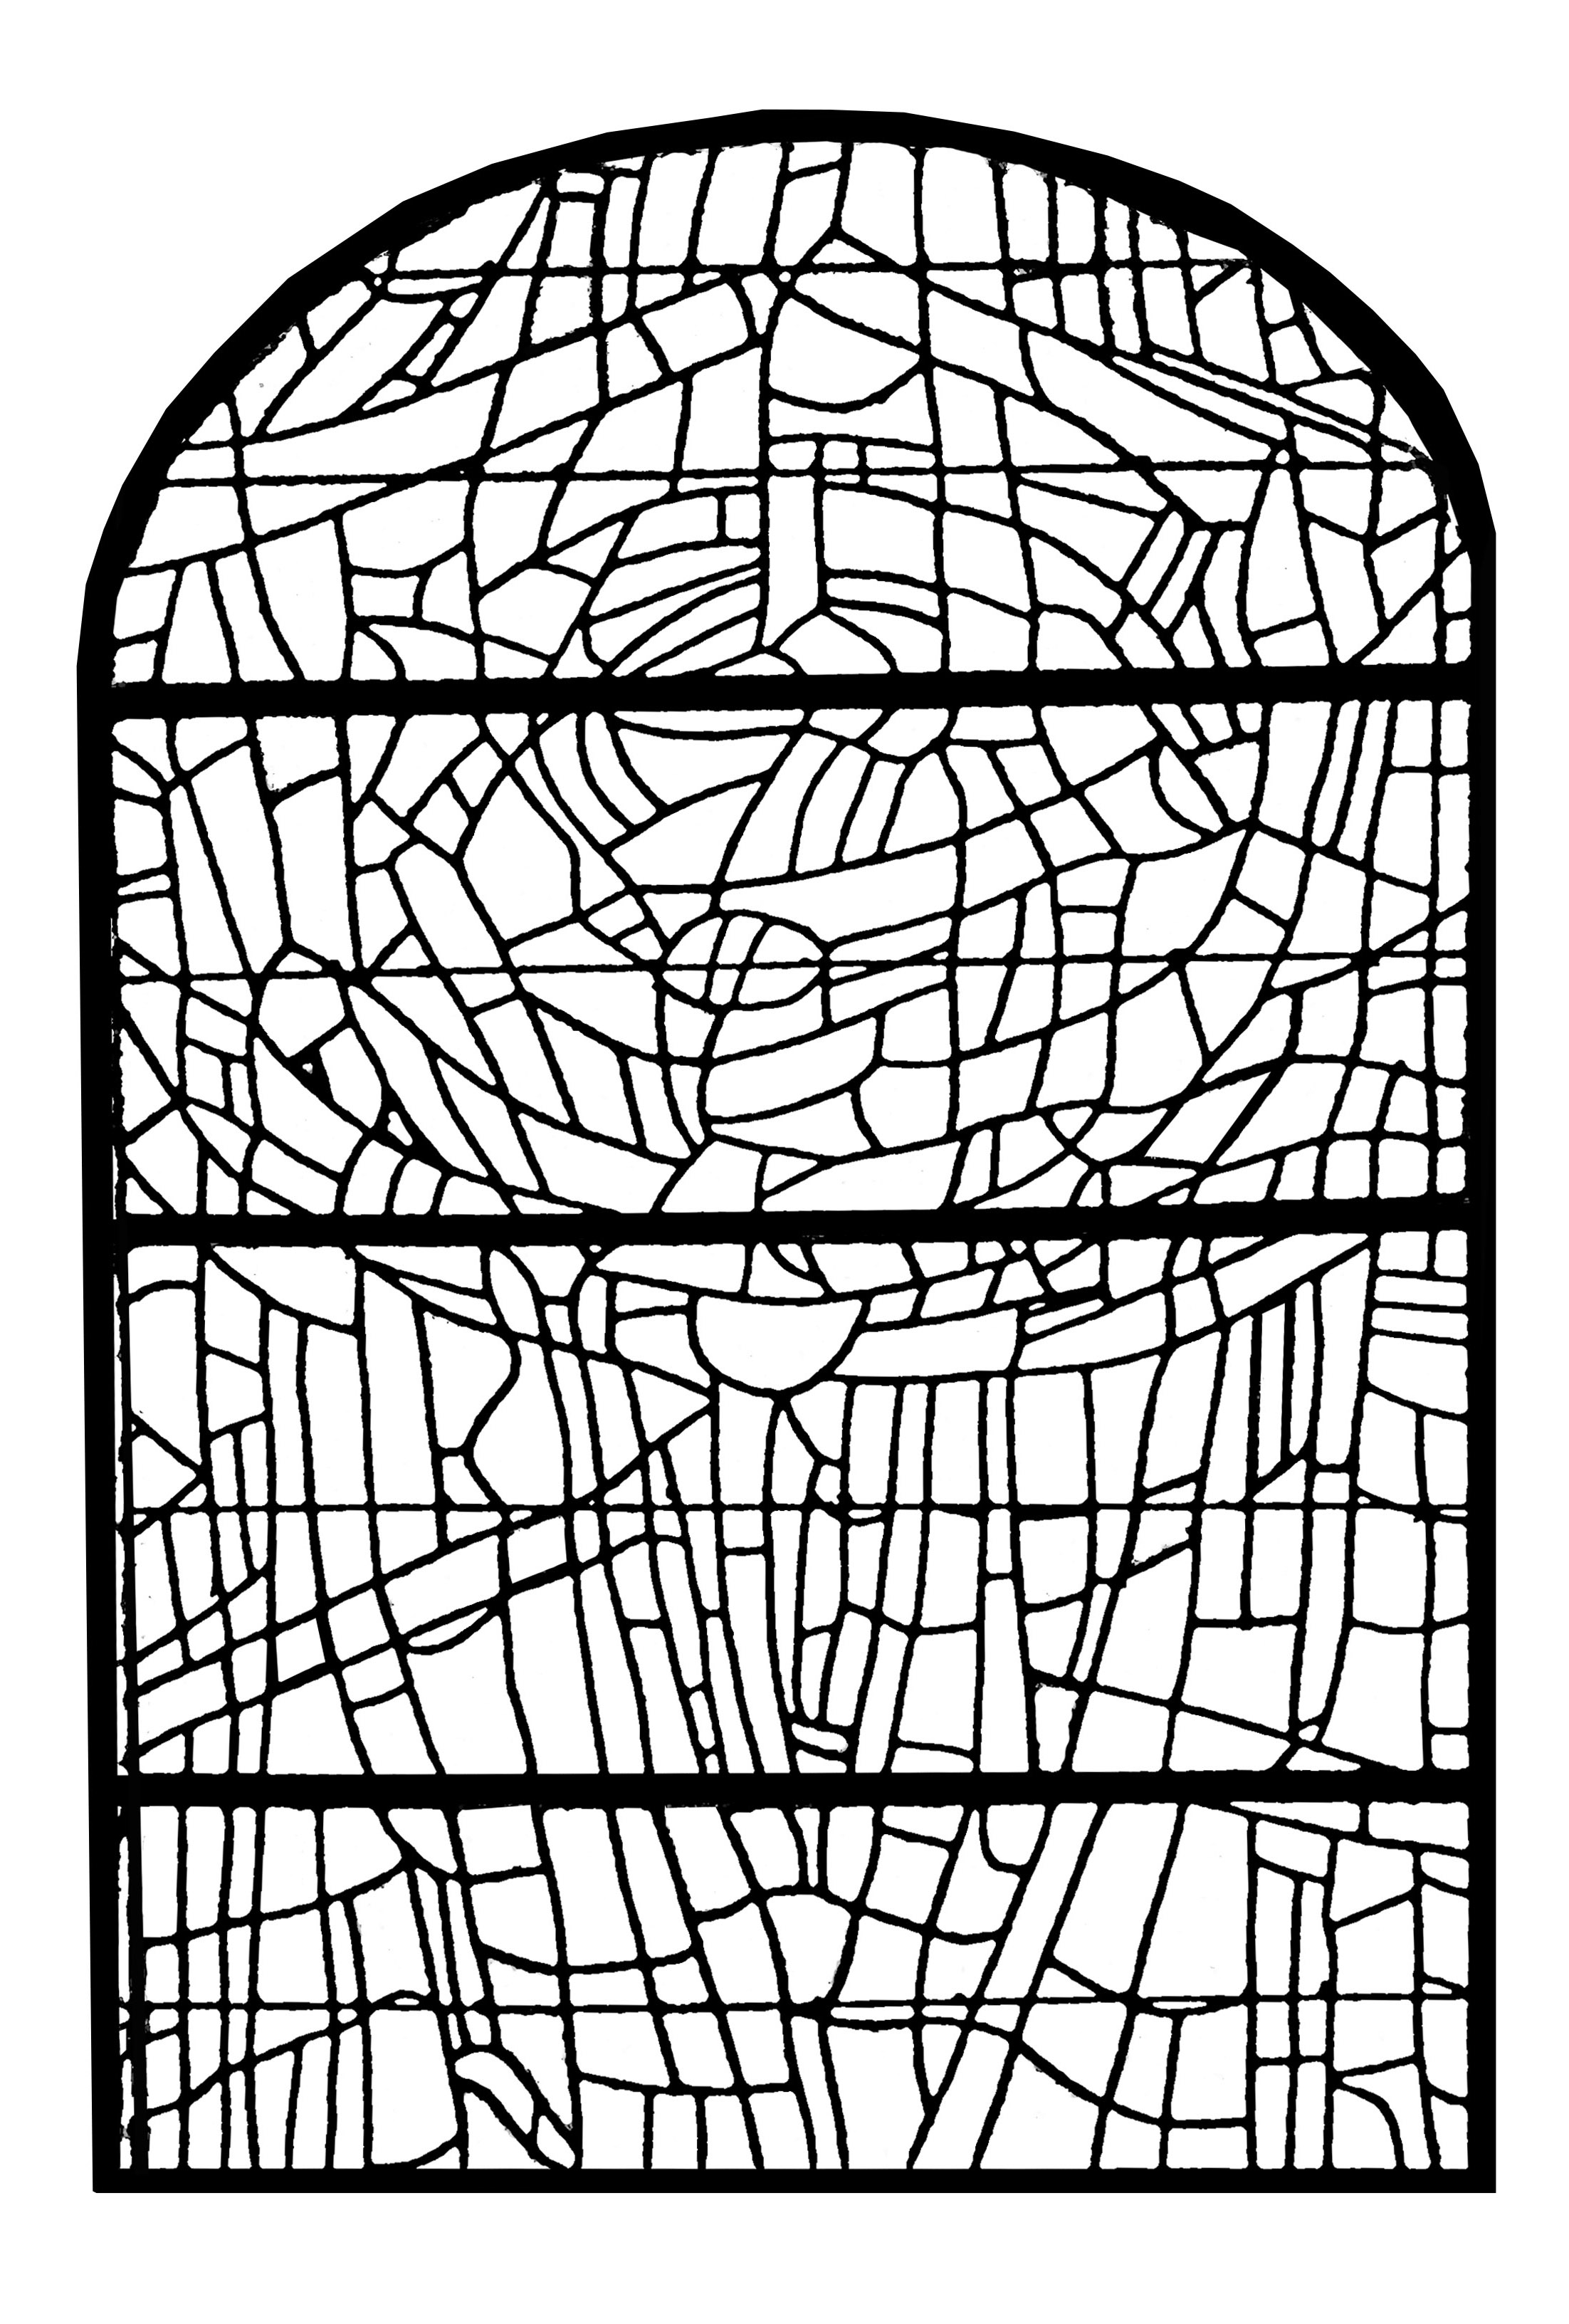 Coloring page made from a modern Stained glass from Saint Servant sur Oust Church (France) - version 3